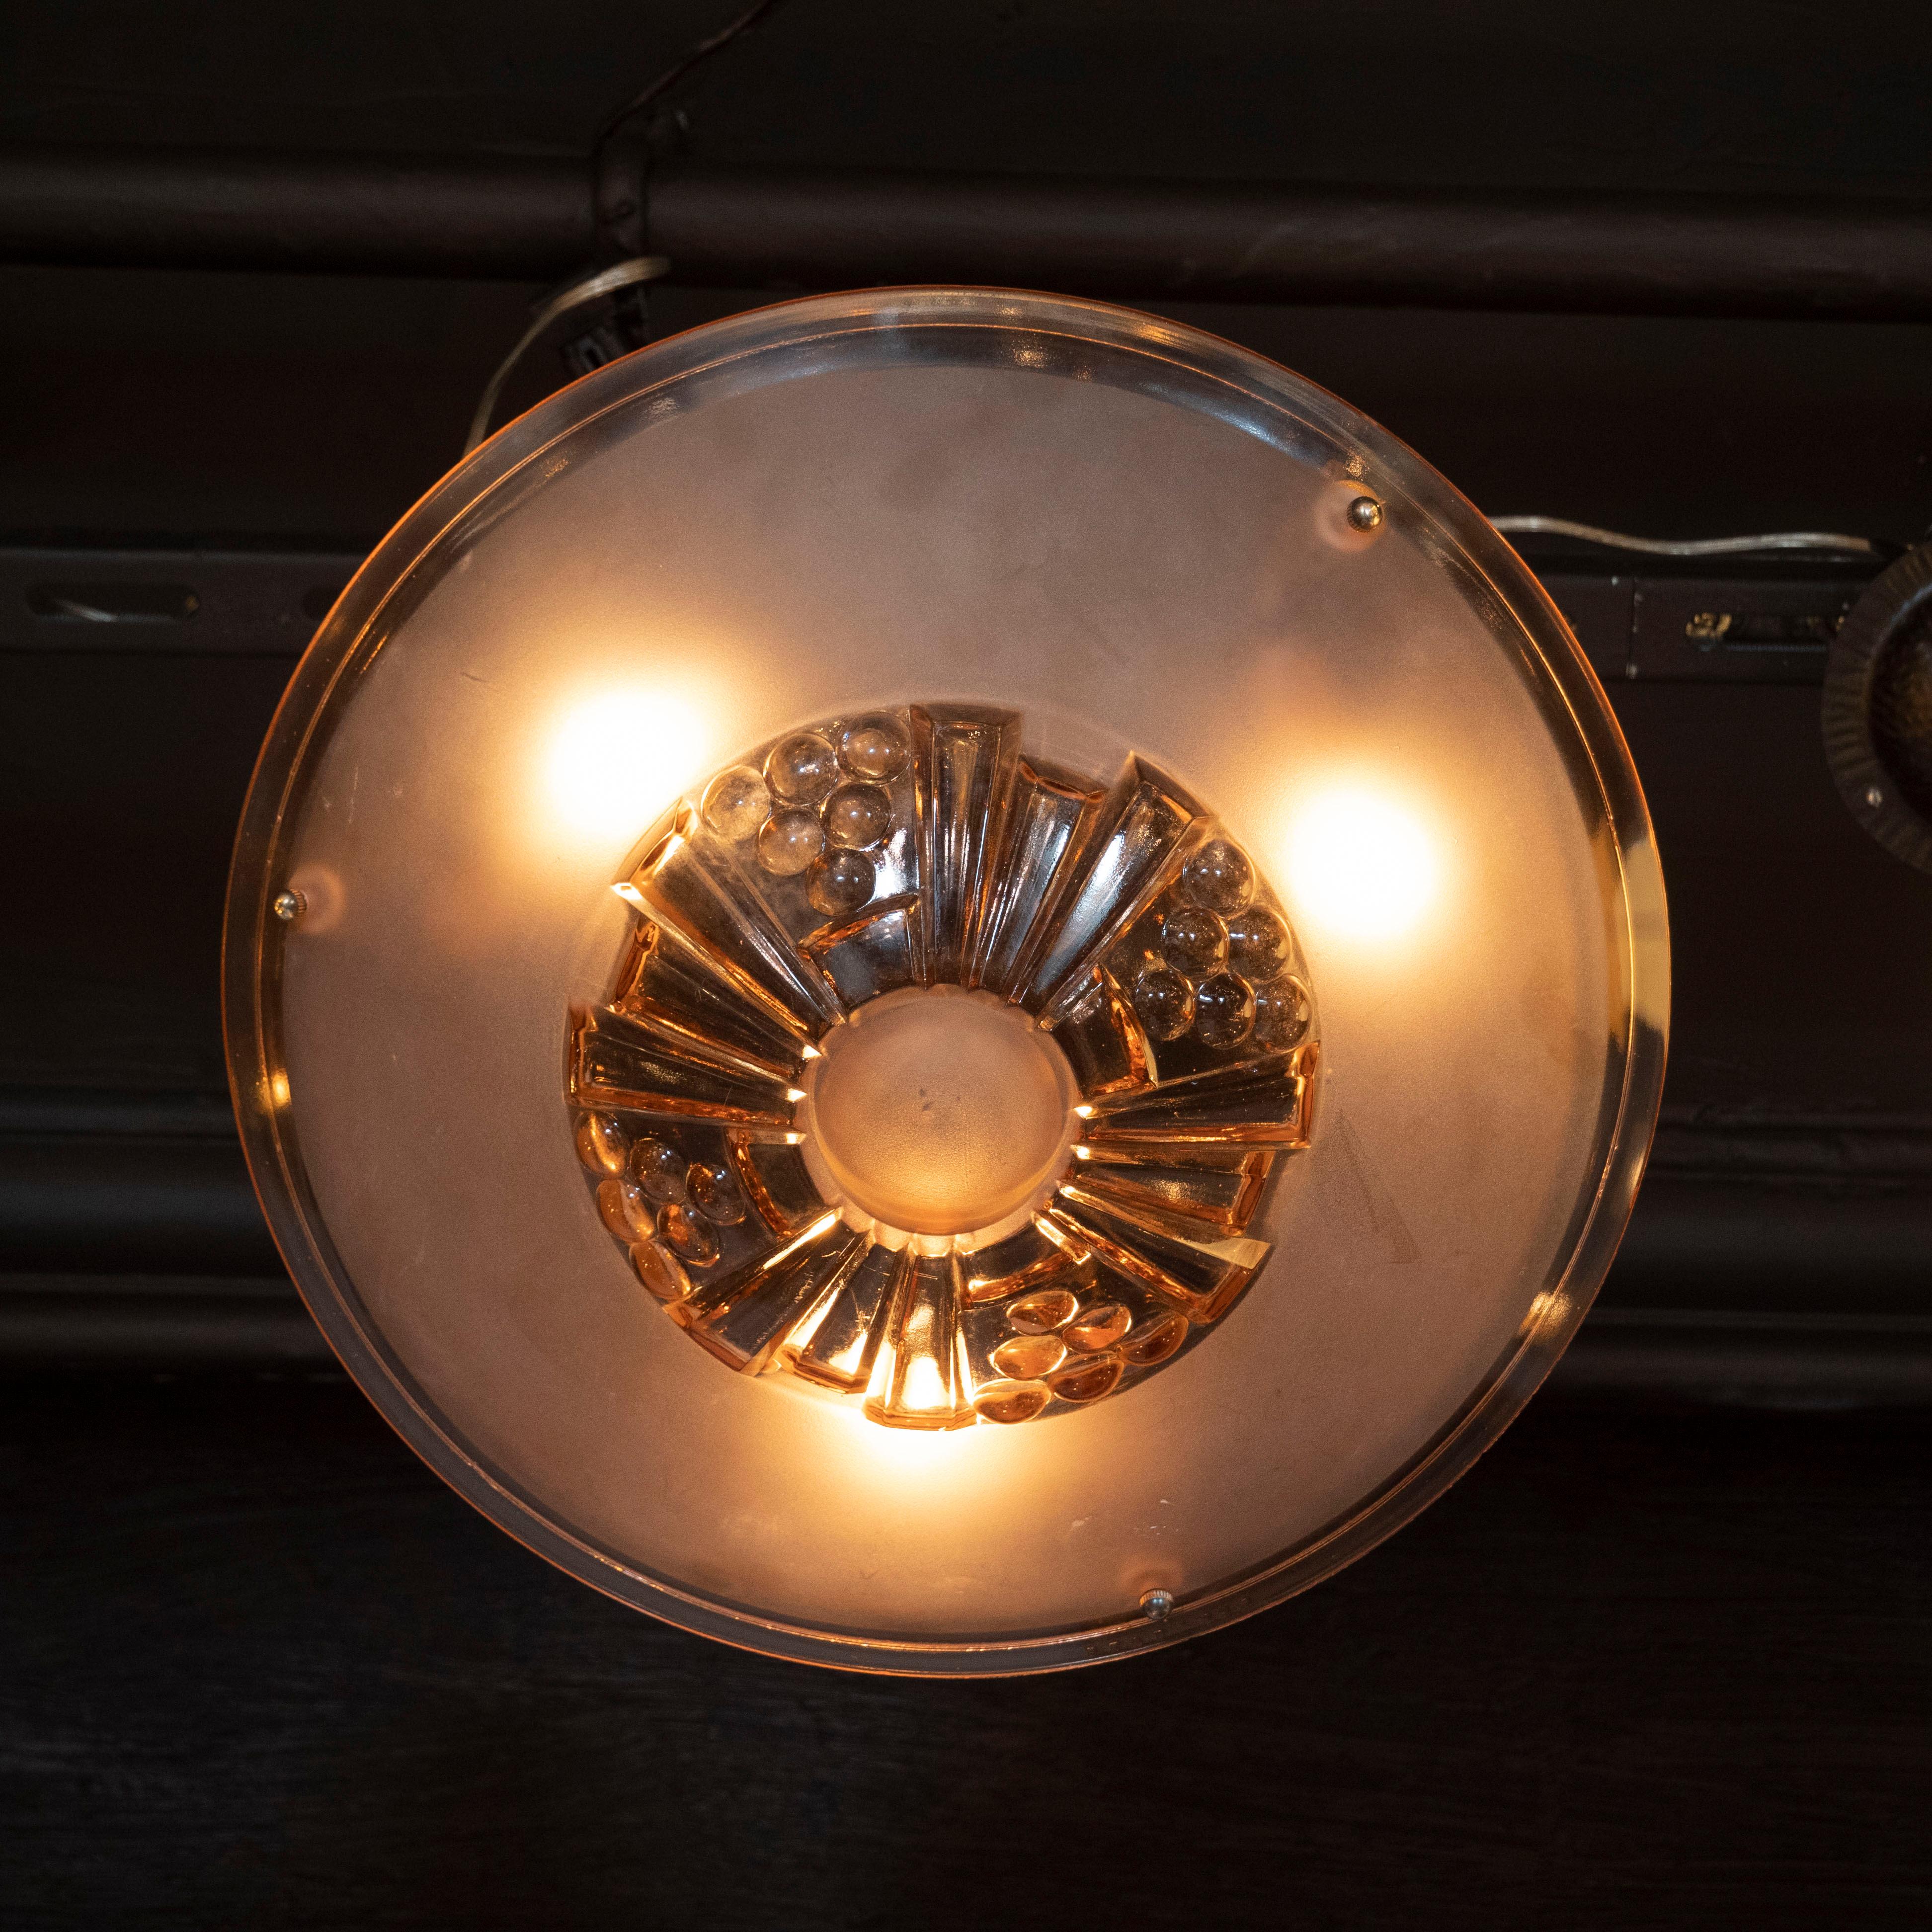 This refined pendant was realized in France, circa 1930. It features a convex body, hand blown in copper hued glass, with geometric cubist motifs including spherical details and skyscraper style fan designs throughout. The glass shade connects to a